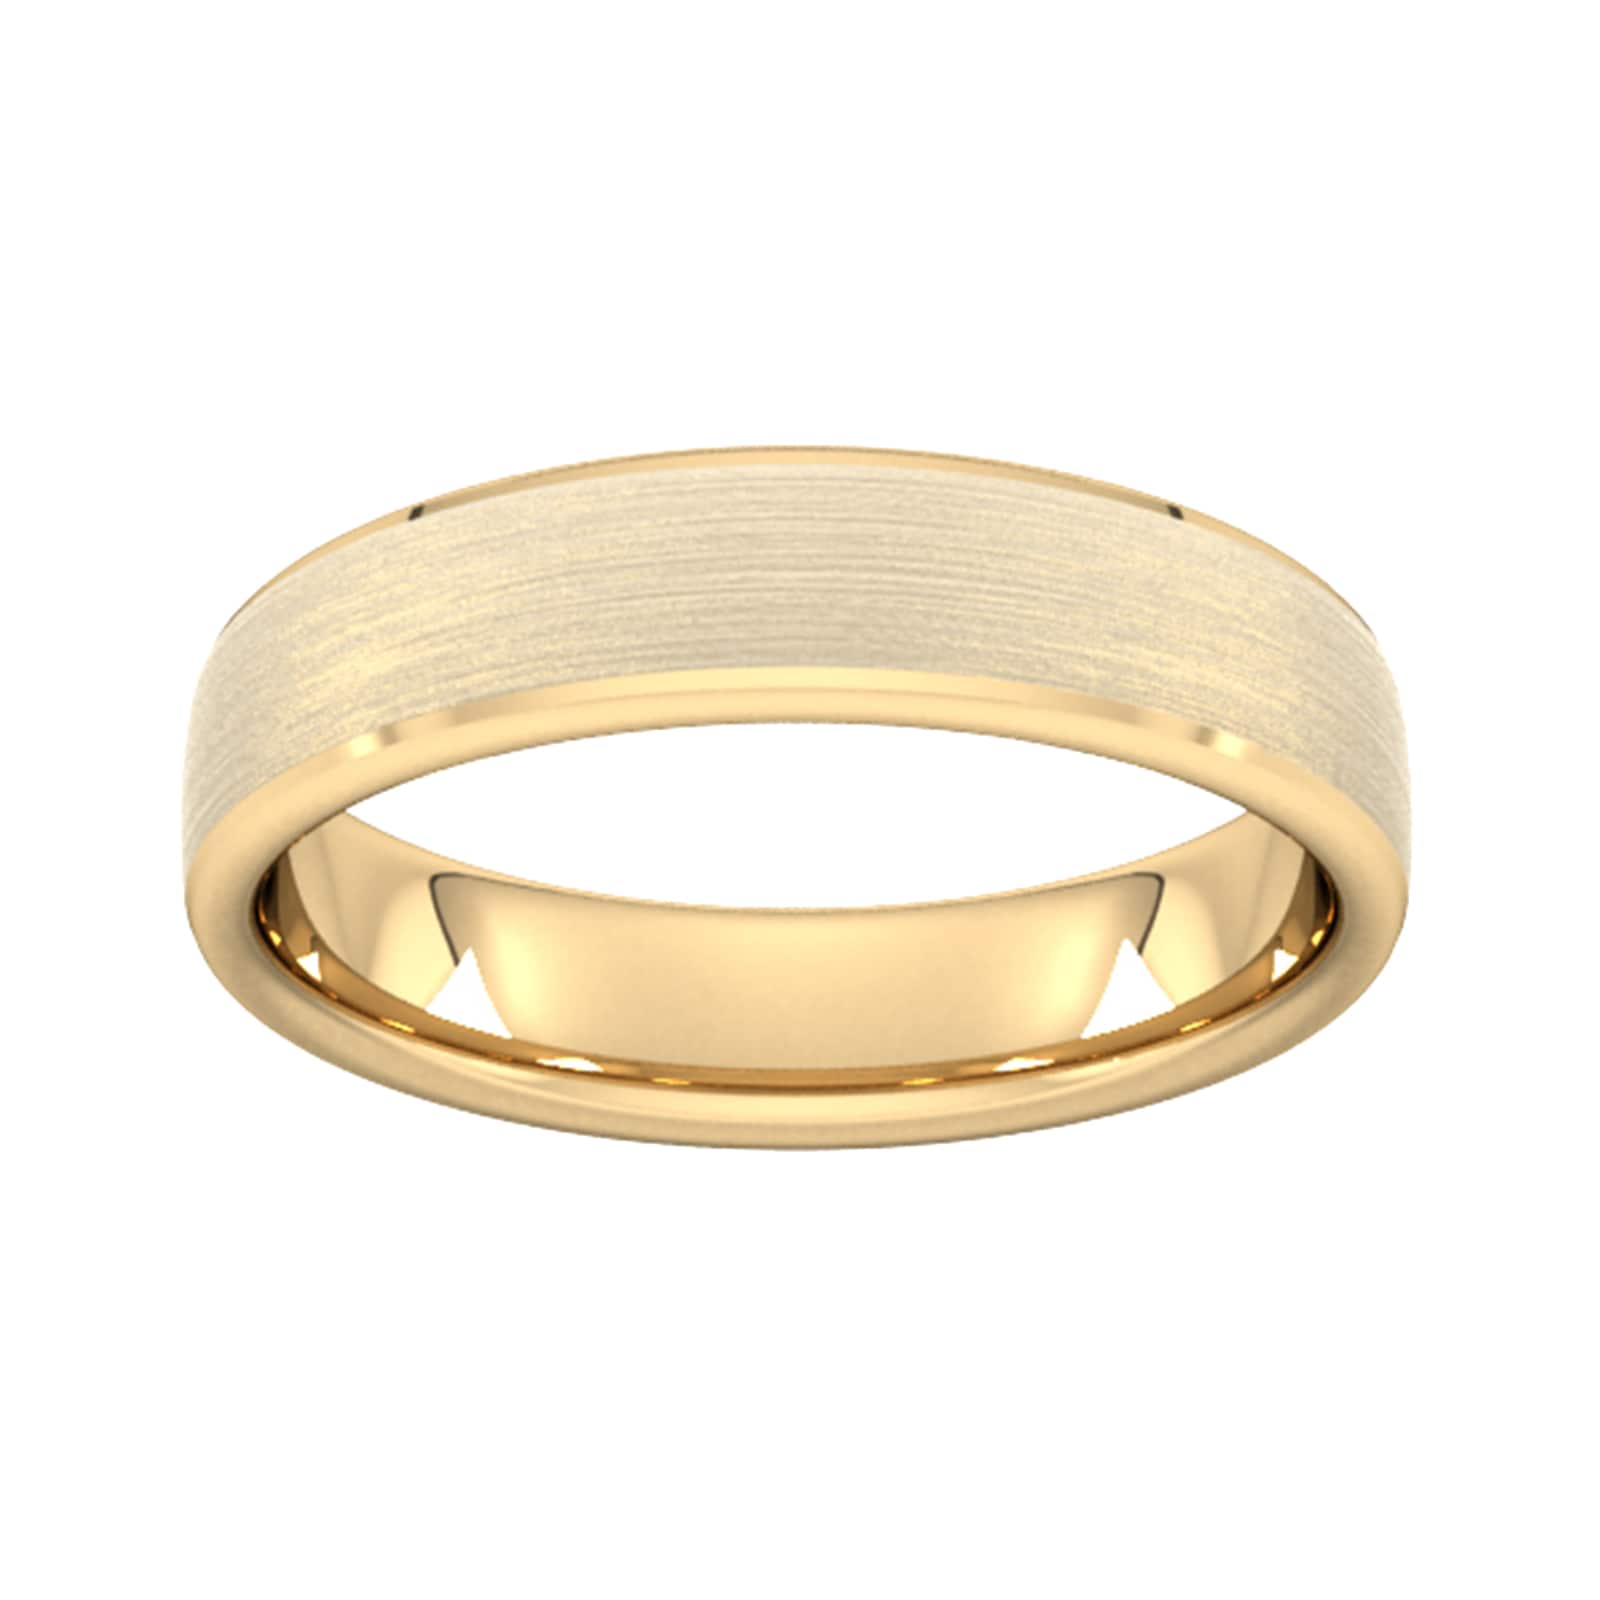 5mm Flat Court Heavy Polished Chamfered Edges With Matt Centre Wedding Ring In 18 Carat Yellow Gold - Ring Size H